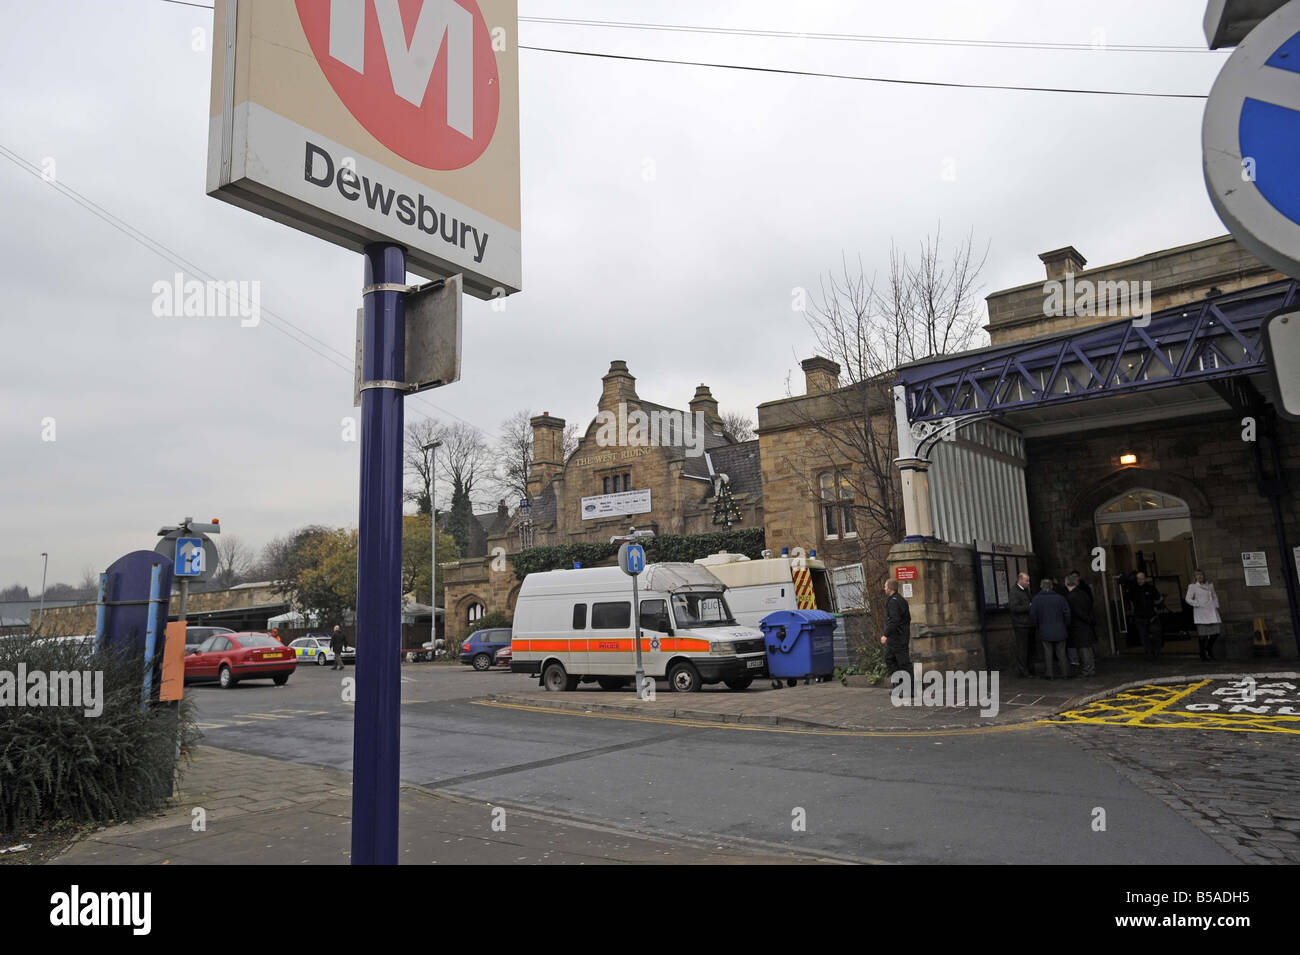 The murder scene at Dewsbury rail station where Ahmed Hassan was killed Picture by Phil Spencer Stock Photo